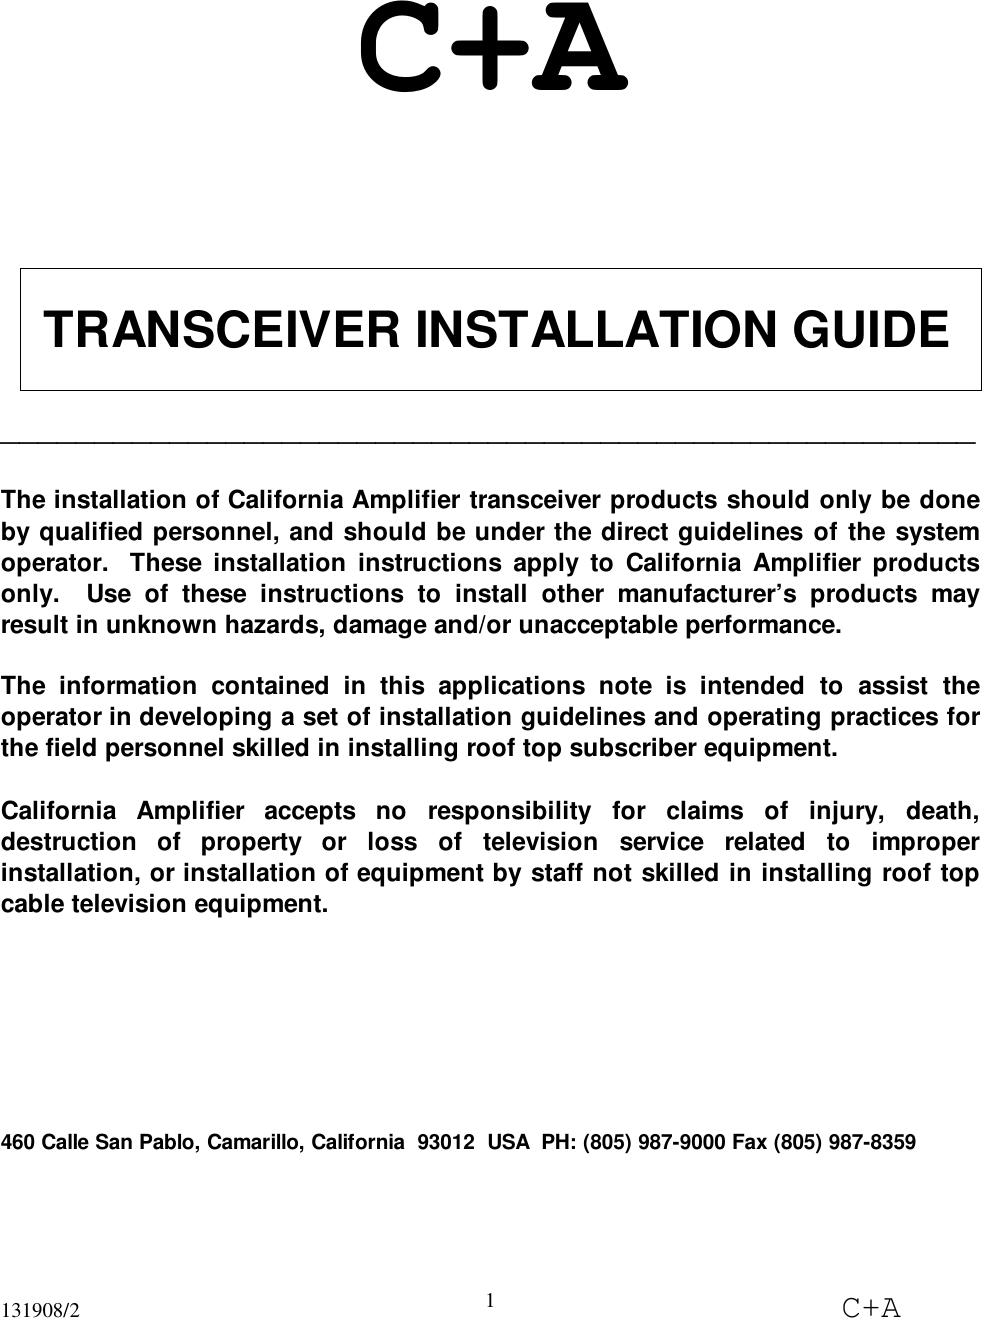 131908/2 C+A1C+A TRANSCEIVER INSTALLATION GUIDE____________________________________________________The installation of California Amplifier transceiver products should only be doneby qualified personnel, and should be under the direct guidelines of the systemoperator.  These installation instructions apply to California Amplifier productsonly.  Use of these instructions to install other manufacturer’s products mayresult in unknown hazards, damage and/or unacceptable performance.The information contained in this applications note is intended to assist theoperator in developing a set of installation guidelines and operating practices forthe field personnel skilled in installing roof top subscriber equipment.California Amplifier accepts no responsibility for claims of injury, death,destruction of property or loss of television service related to improperinstallation, or installation of equipment by staff not skilled in installing roof topcable television equipment.460 Calle San Pablo, Camarillo, California  93012  USA  PH: (805) 987-9000 Fax (805) 987-8359